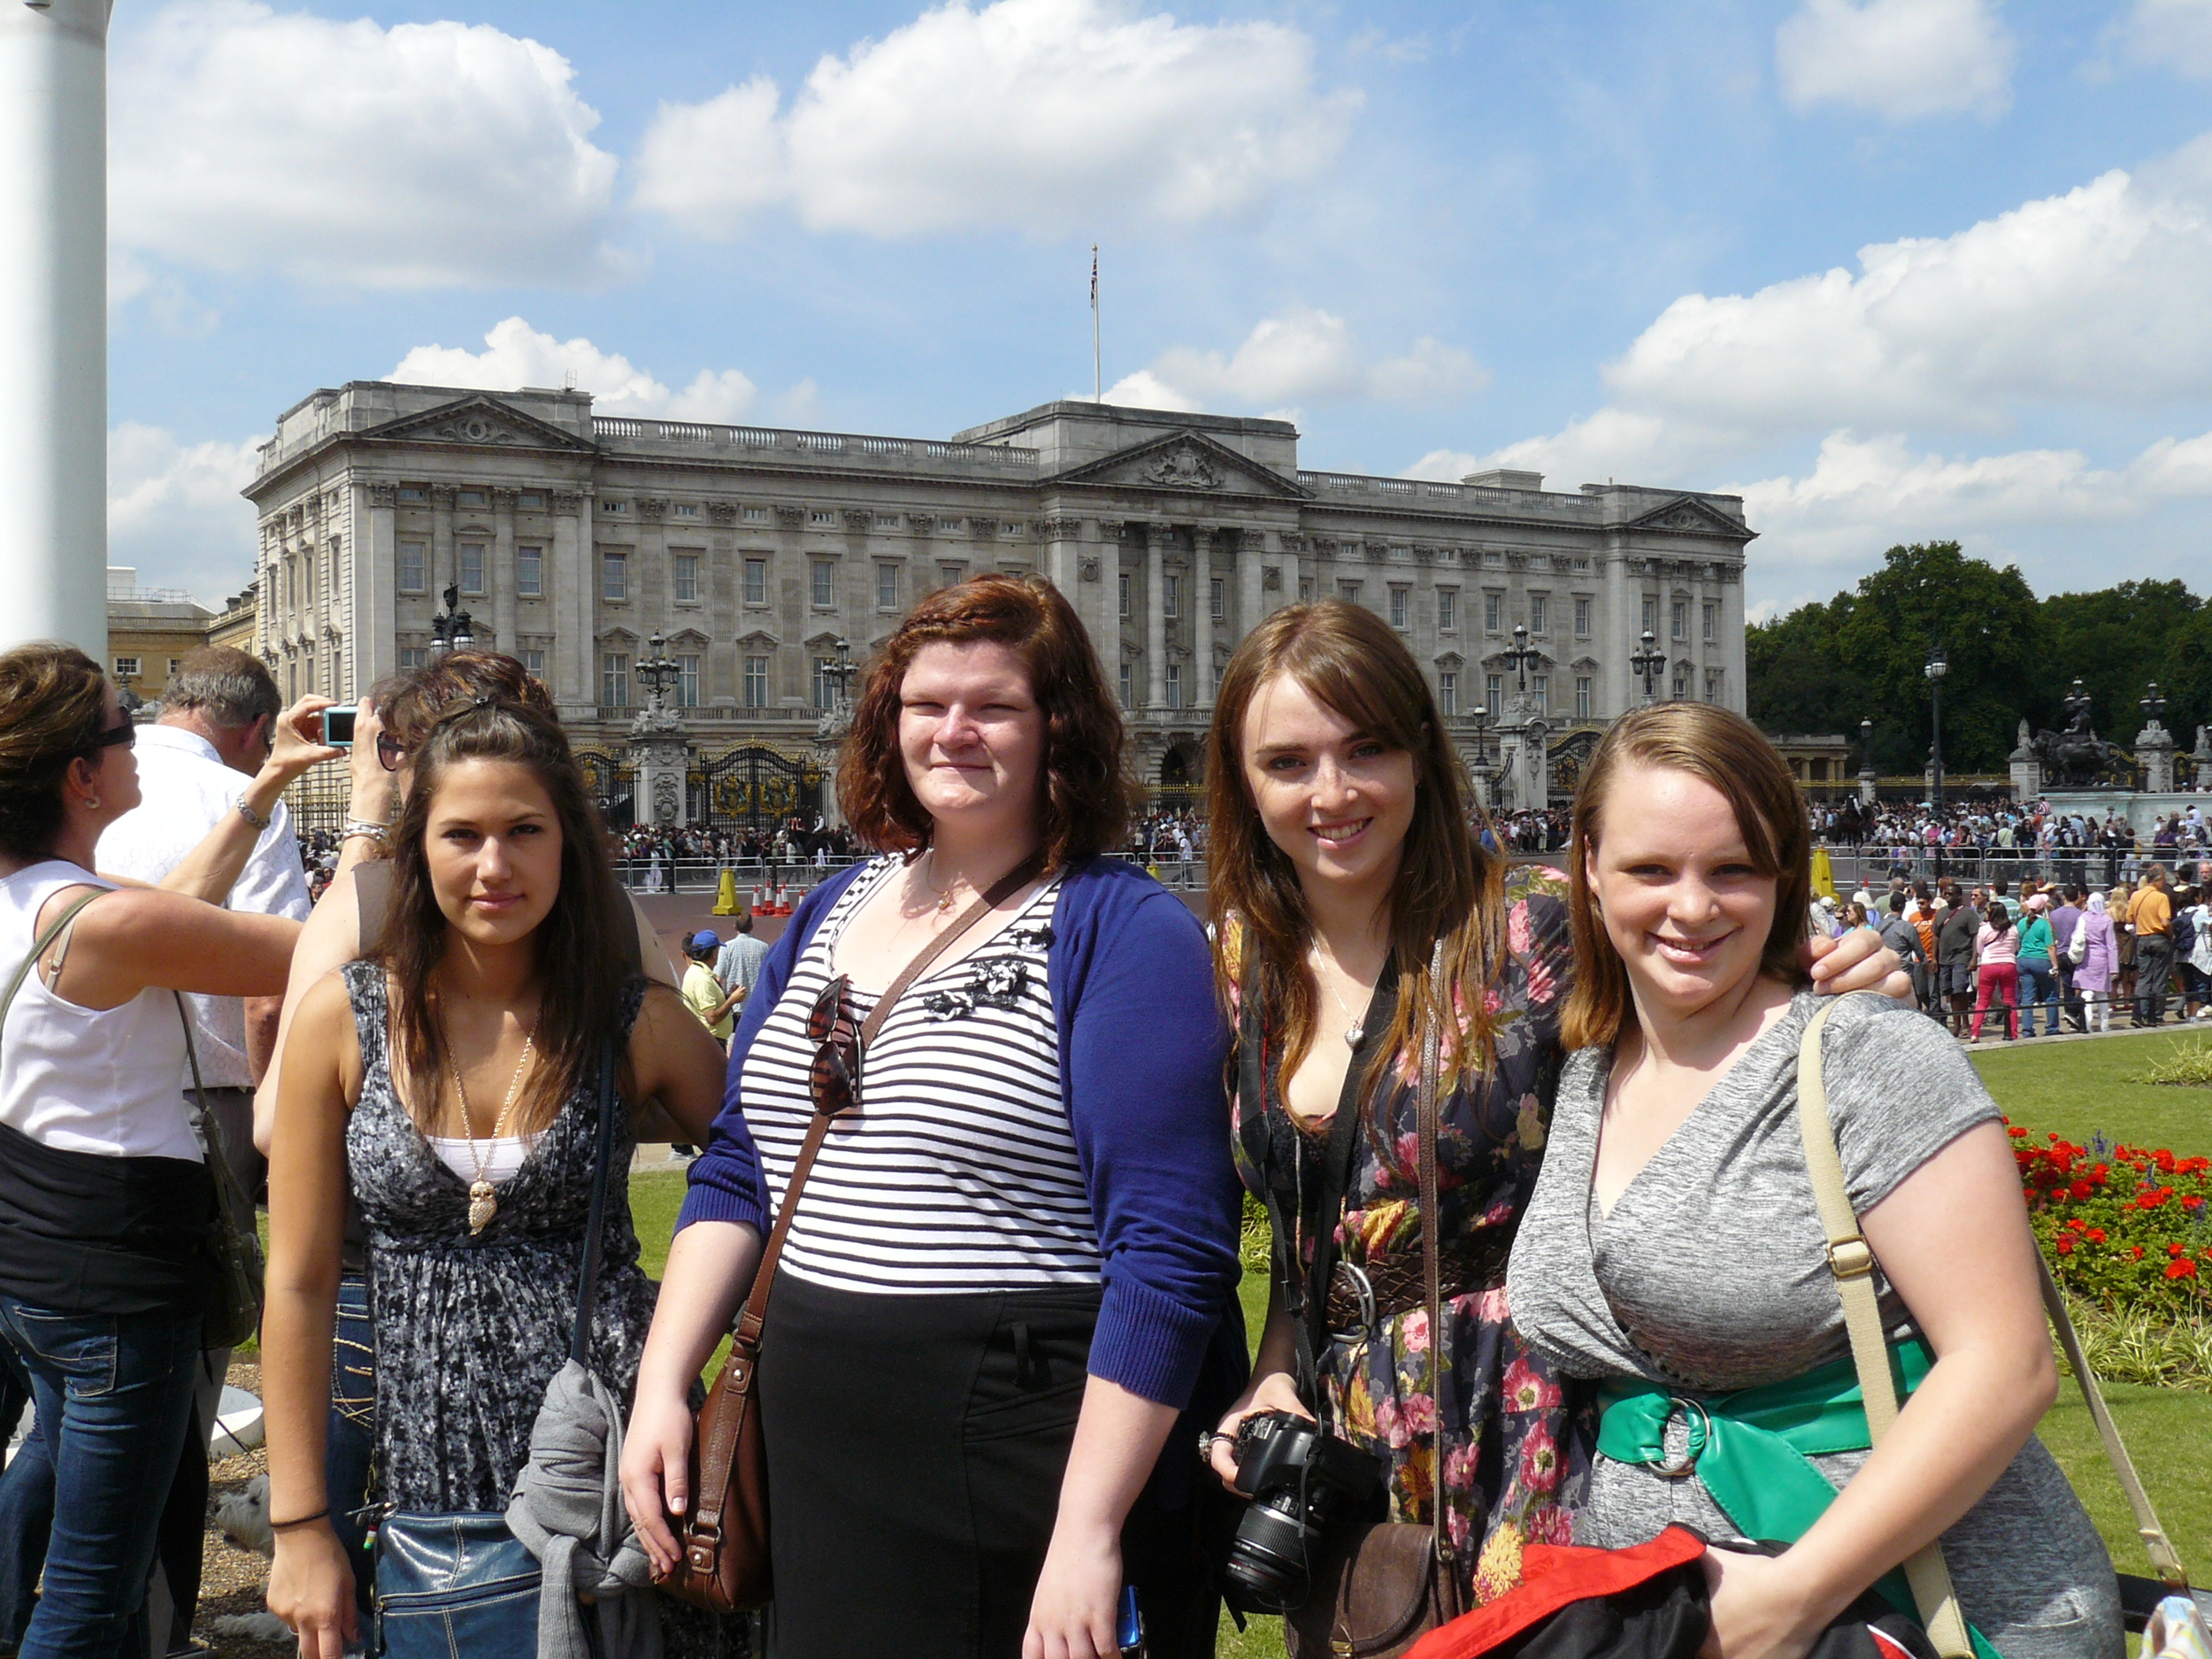  Sight seeing by Buckingham Palace.​ 